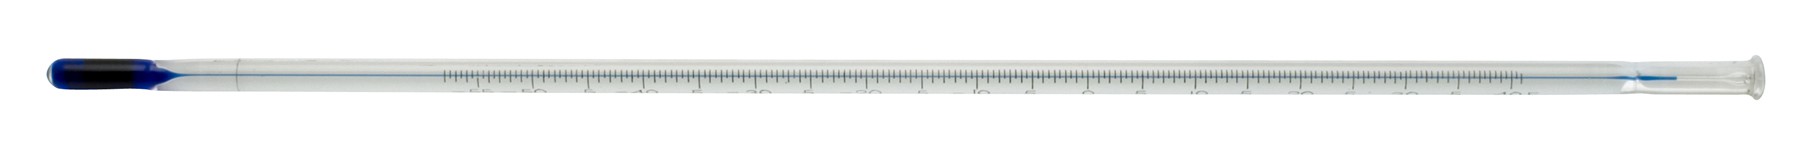 H-B DURAC Plus ASTM Like Liquid-In-Glass Thermometer; 5C / Cloud and Pour, 108mm Immersion, -38 to 50C, Organic Liquid Fill